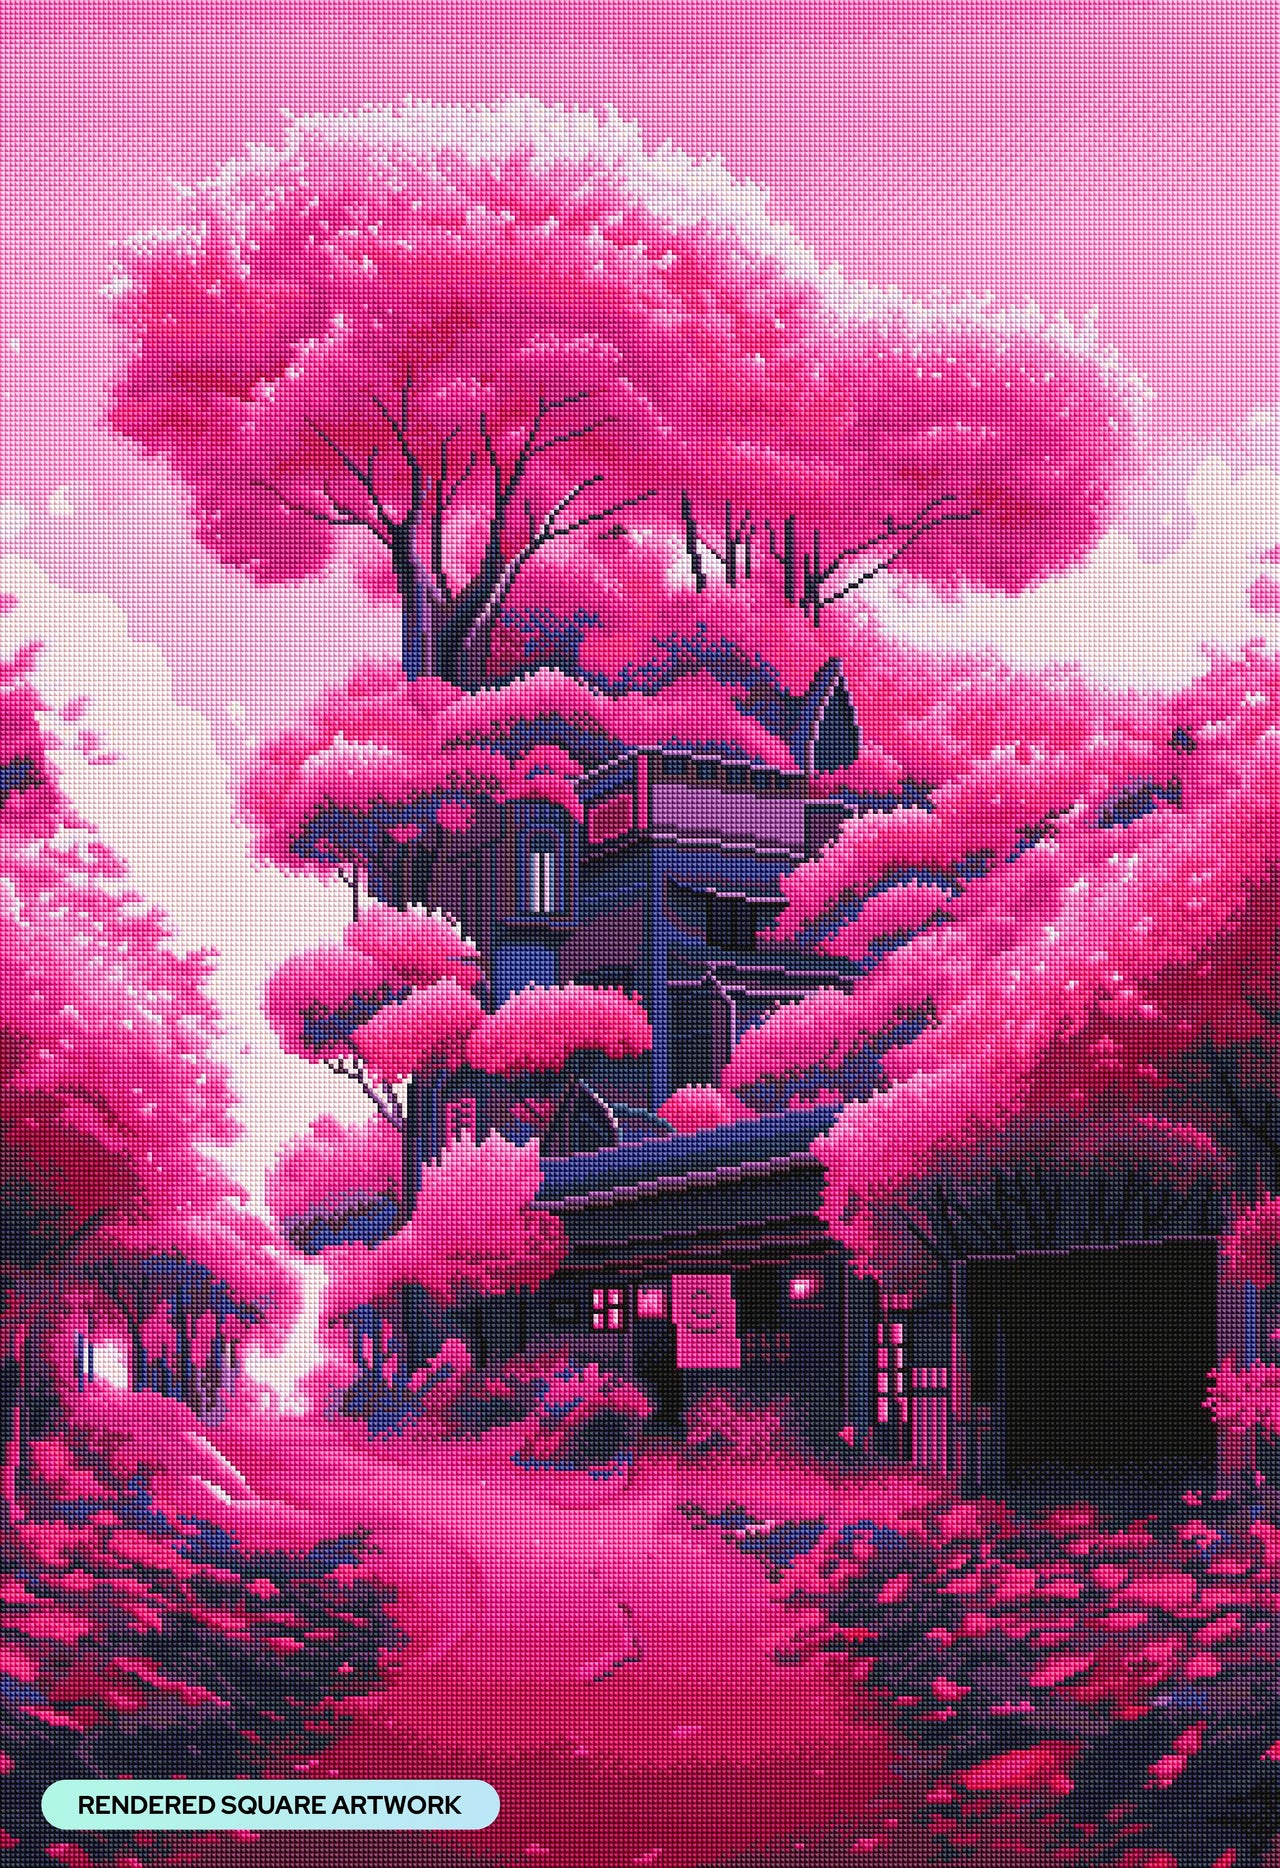 Diamond Painting Pink Treehouse 25.6" x 37.4" (65cm x 95cm) / Square with 34 Colors including 2 ABs and 2 Fairy Dust Diamonds / 99,441